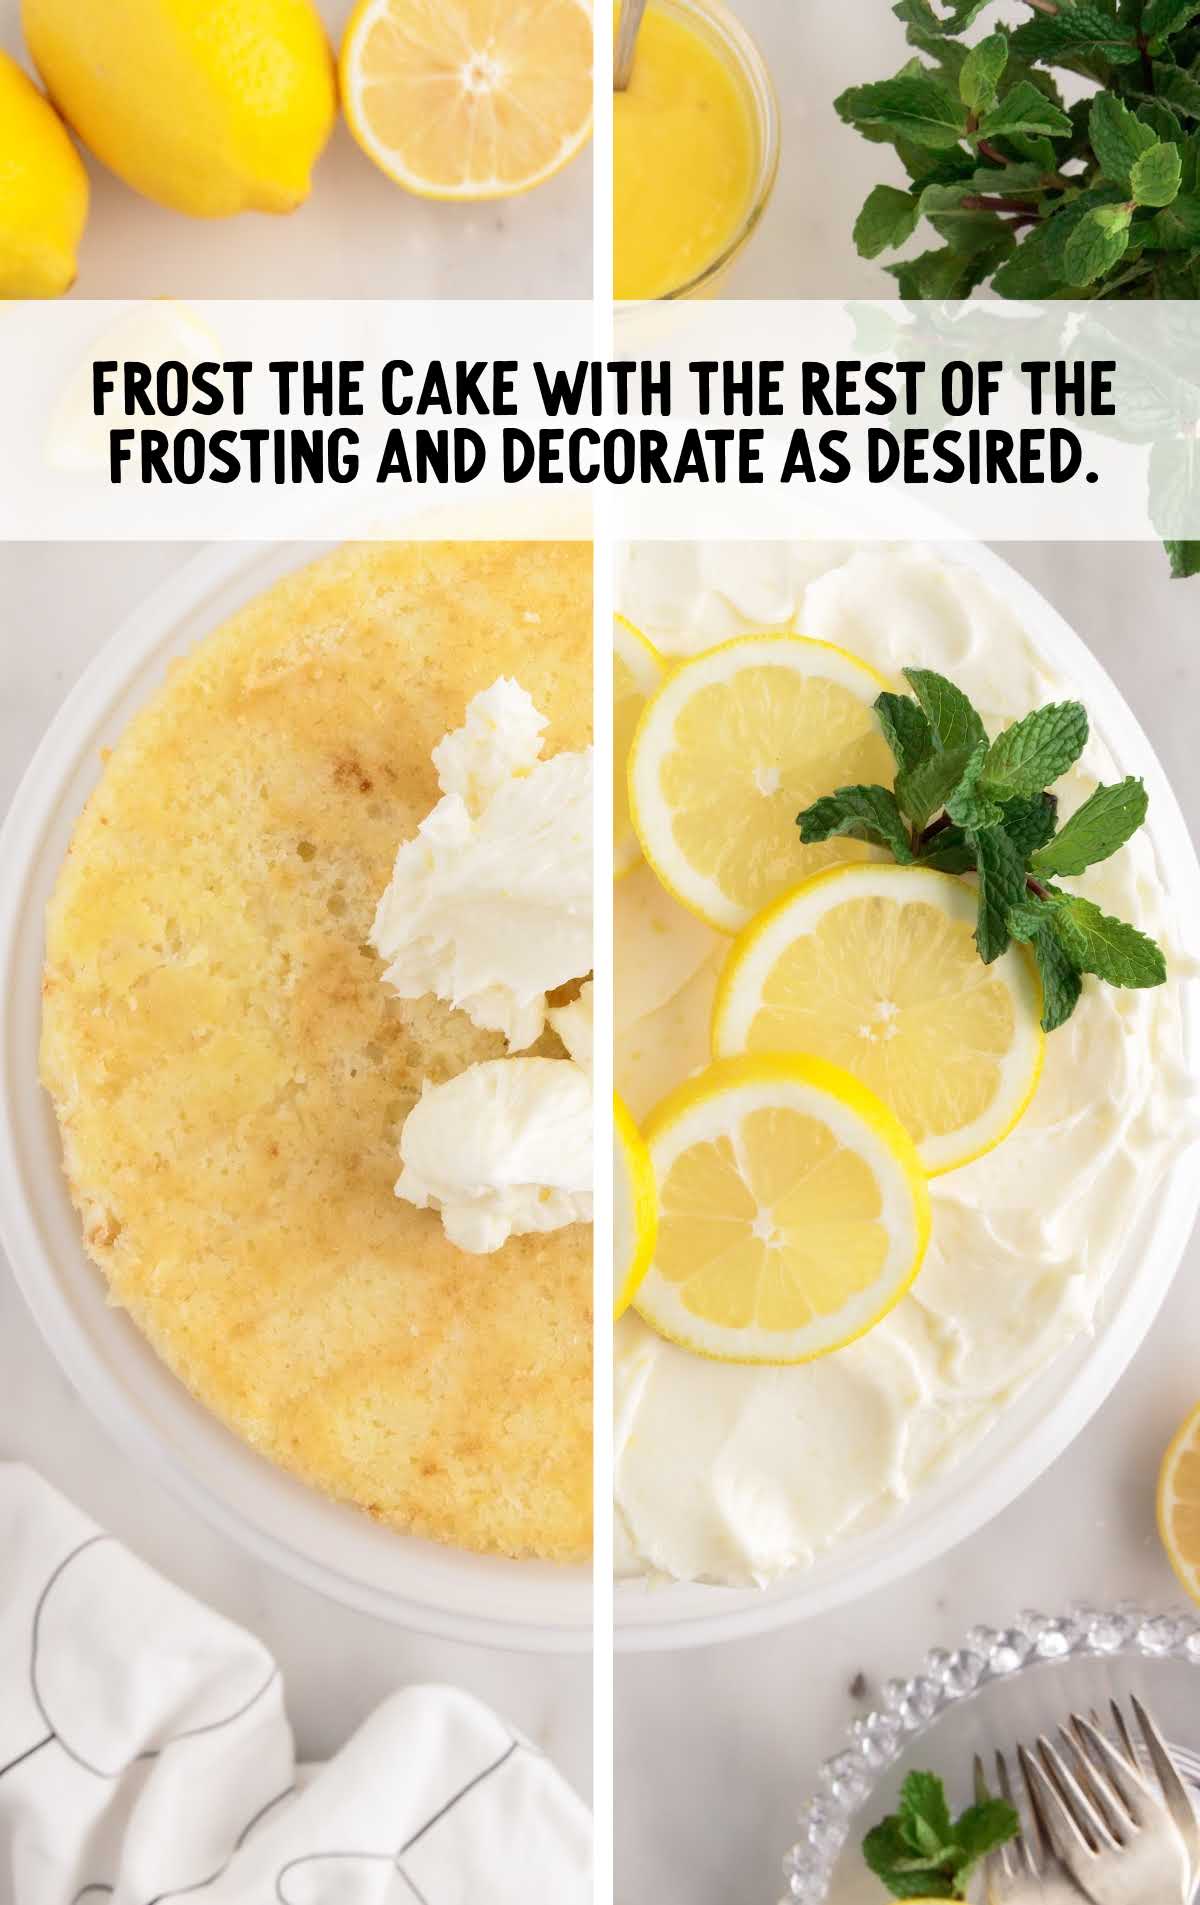 cake decorated with frosting, lemon slices, and mint